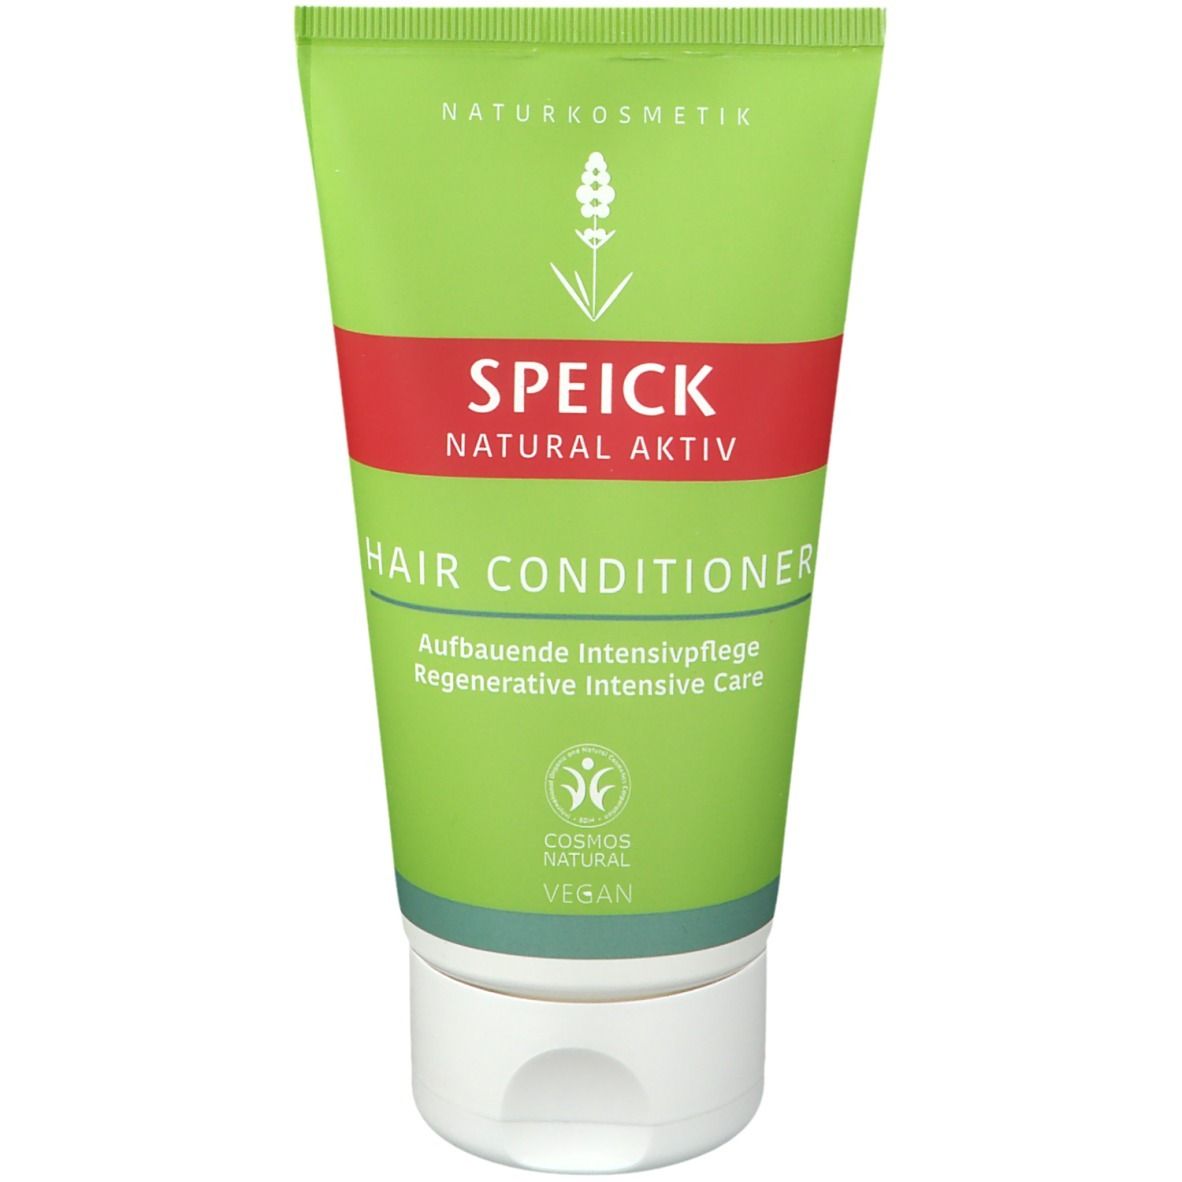 Image of SPEICK Natural Aktiv Hair Conditioner